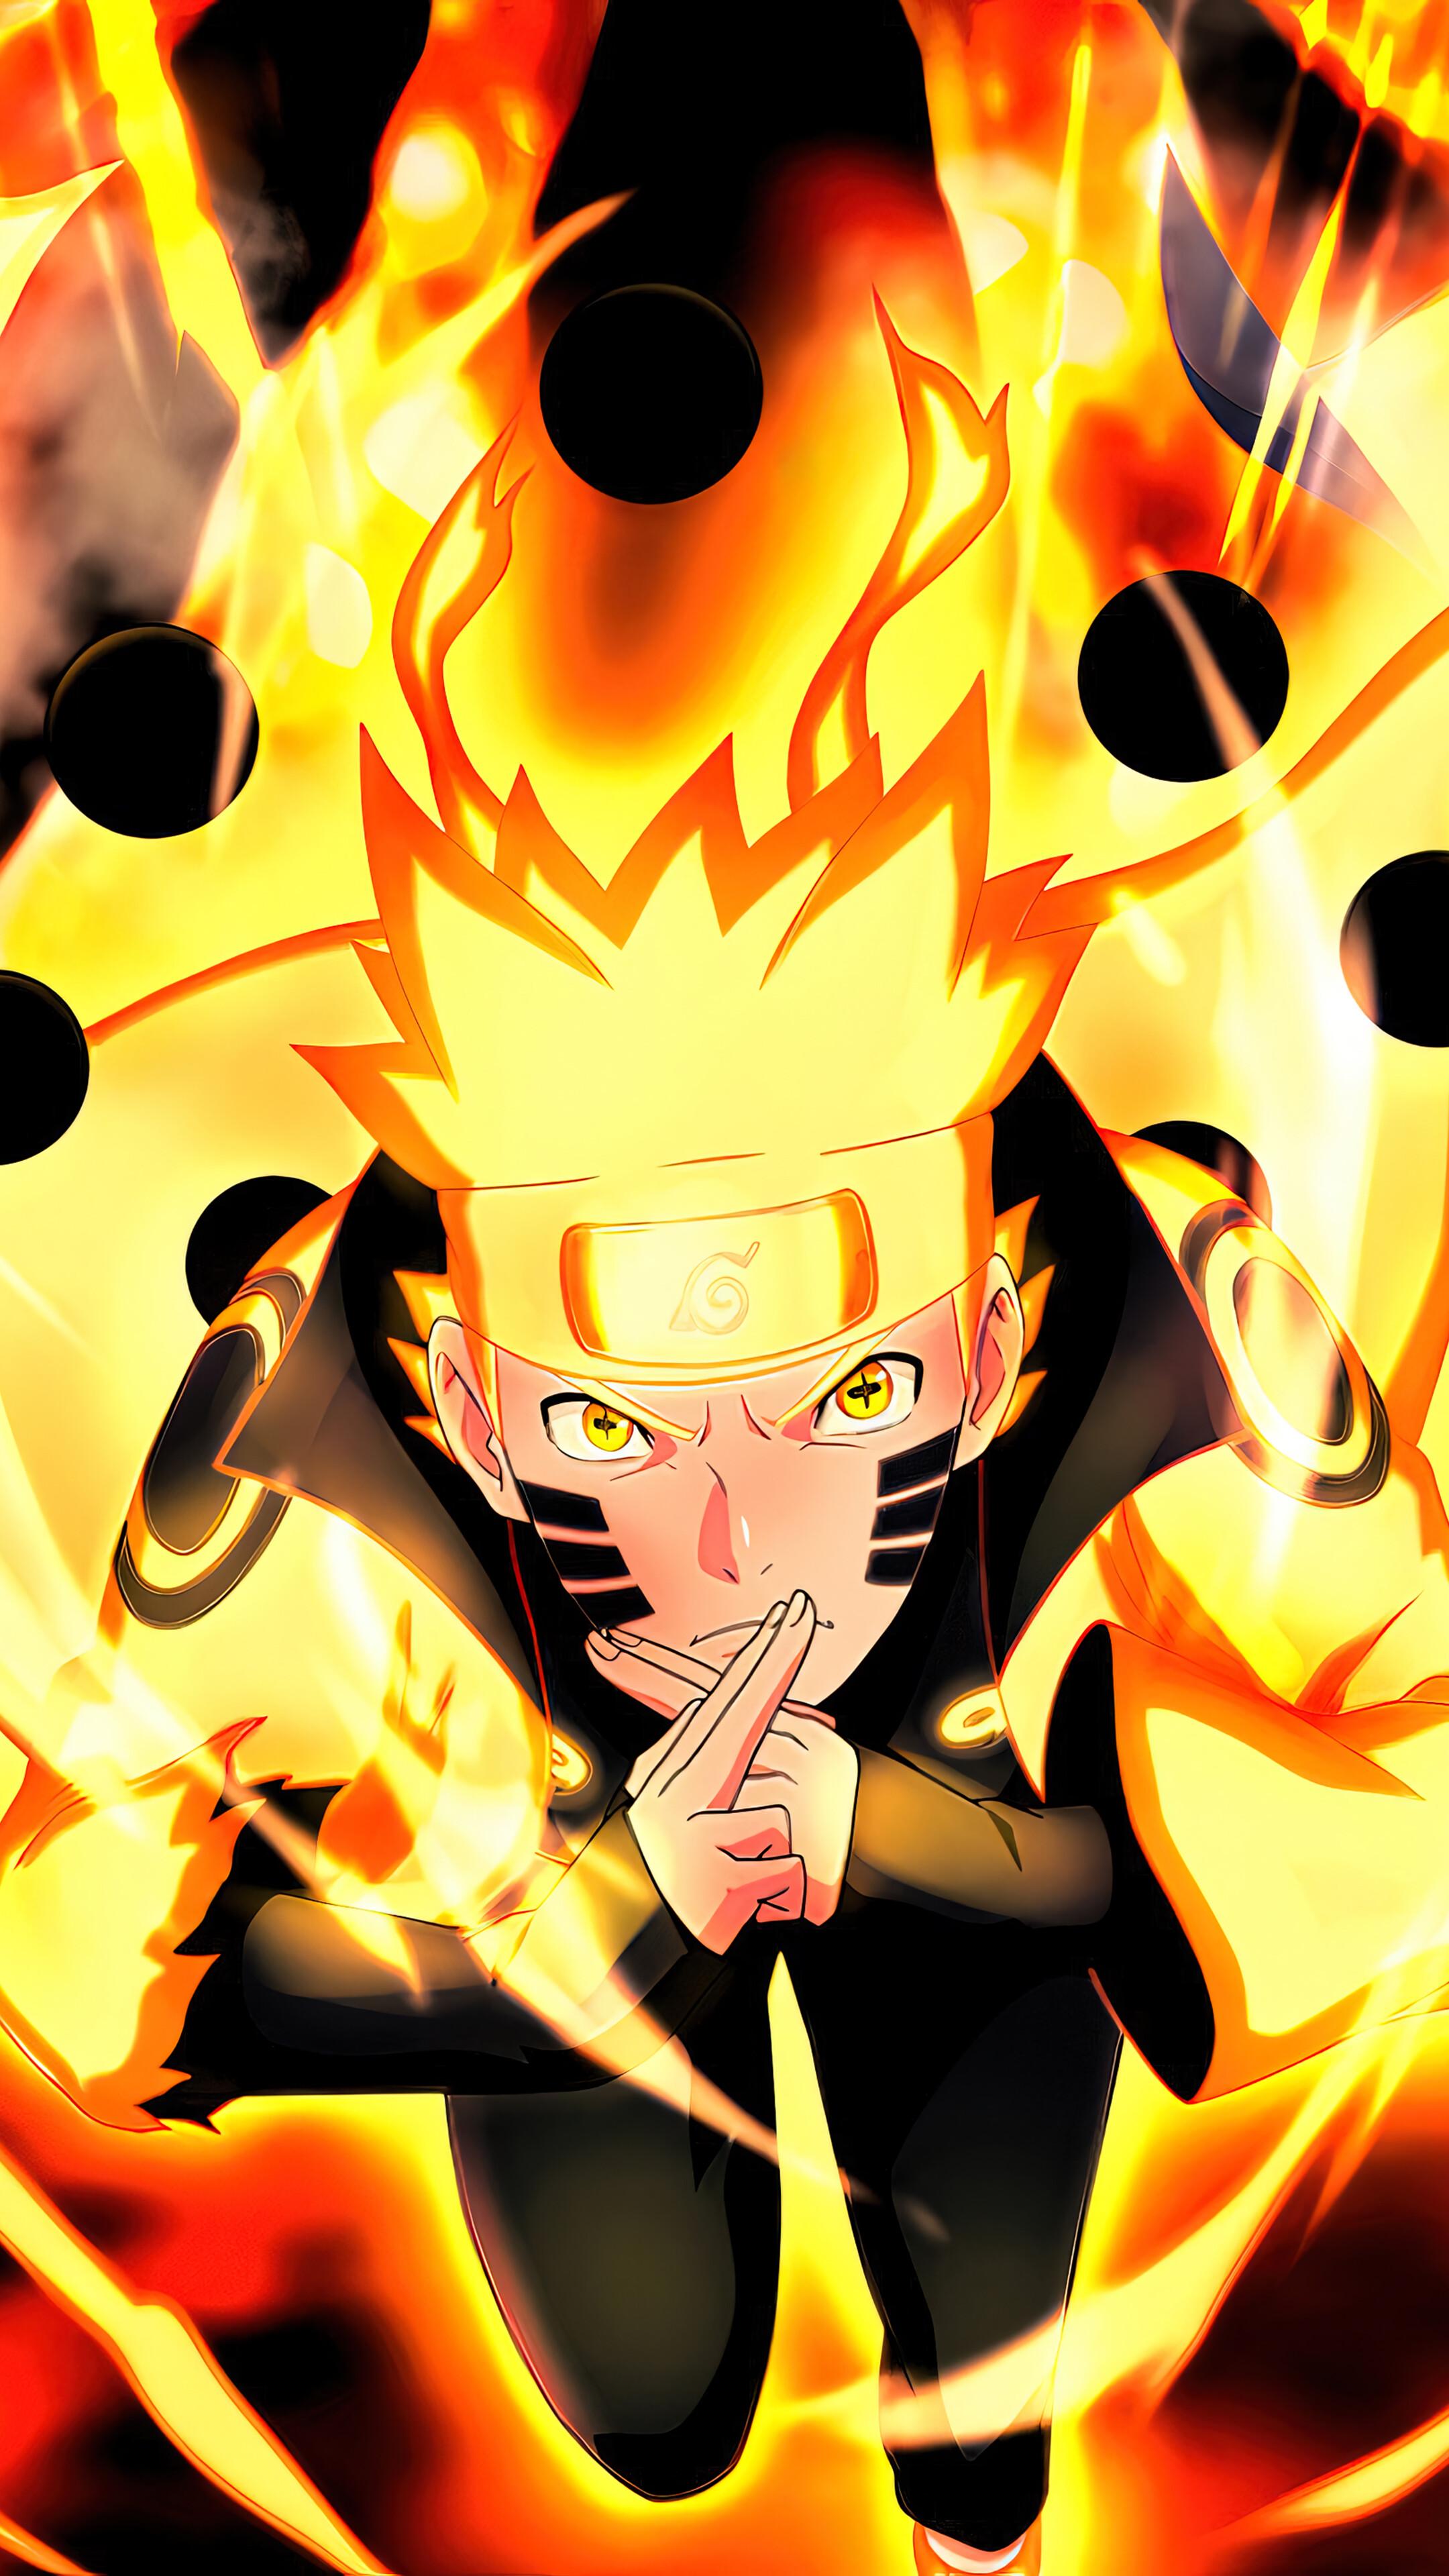 Naruto Sage Mode Wallpapers  Top 23 Best Naruto Sage Mode Wallpapers  HQ 